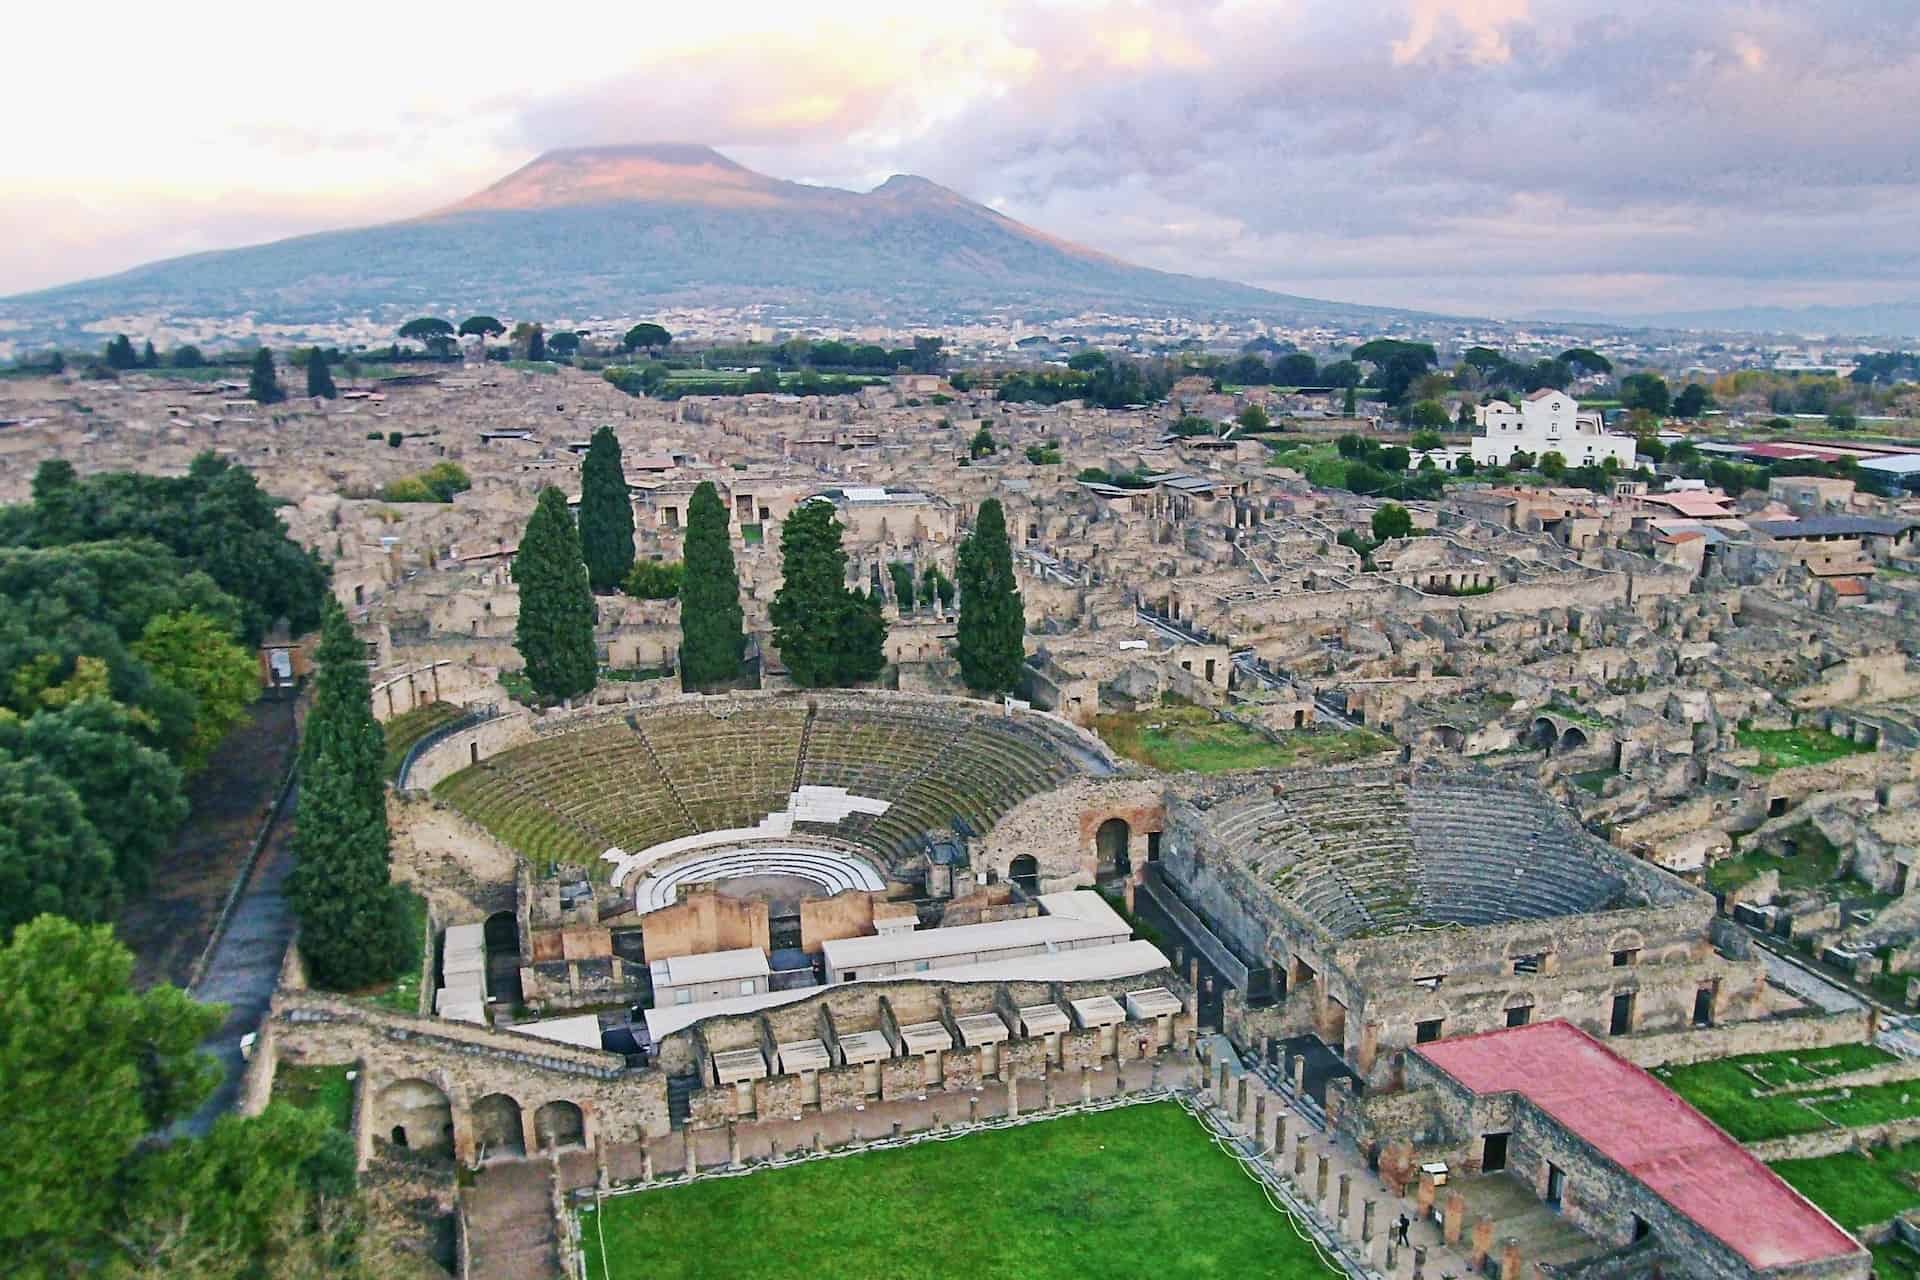 The Ultimate Pompeii Travel Guide: How to Explore the Ancient City Like a Pro